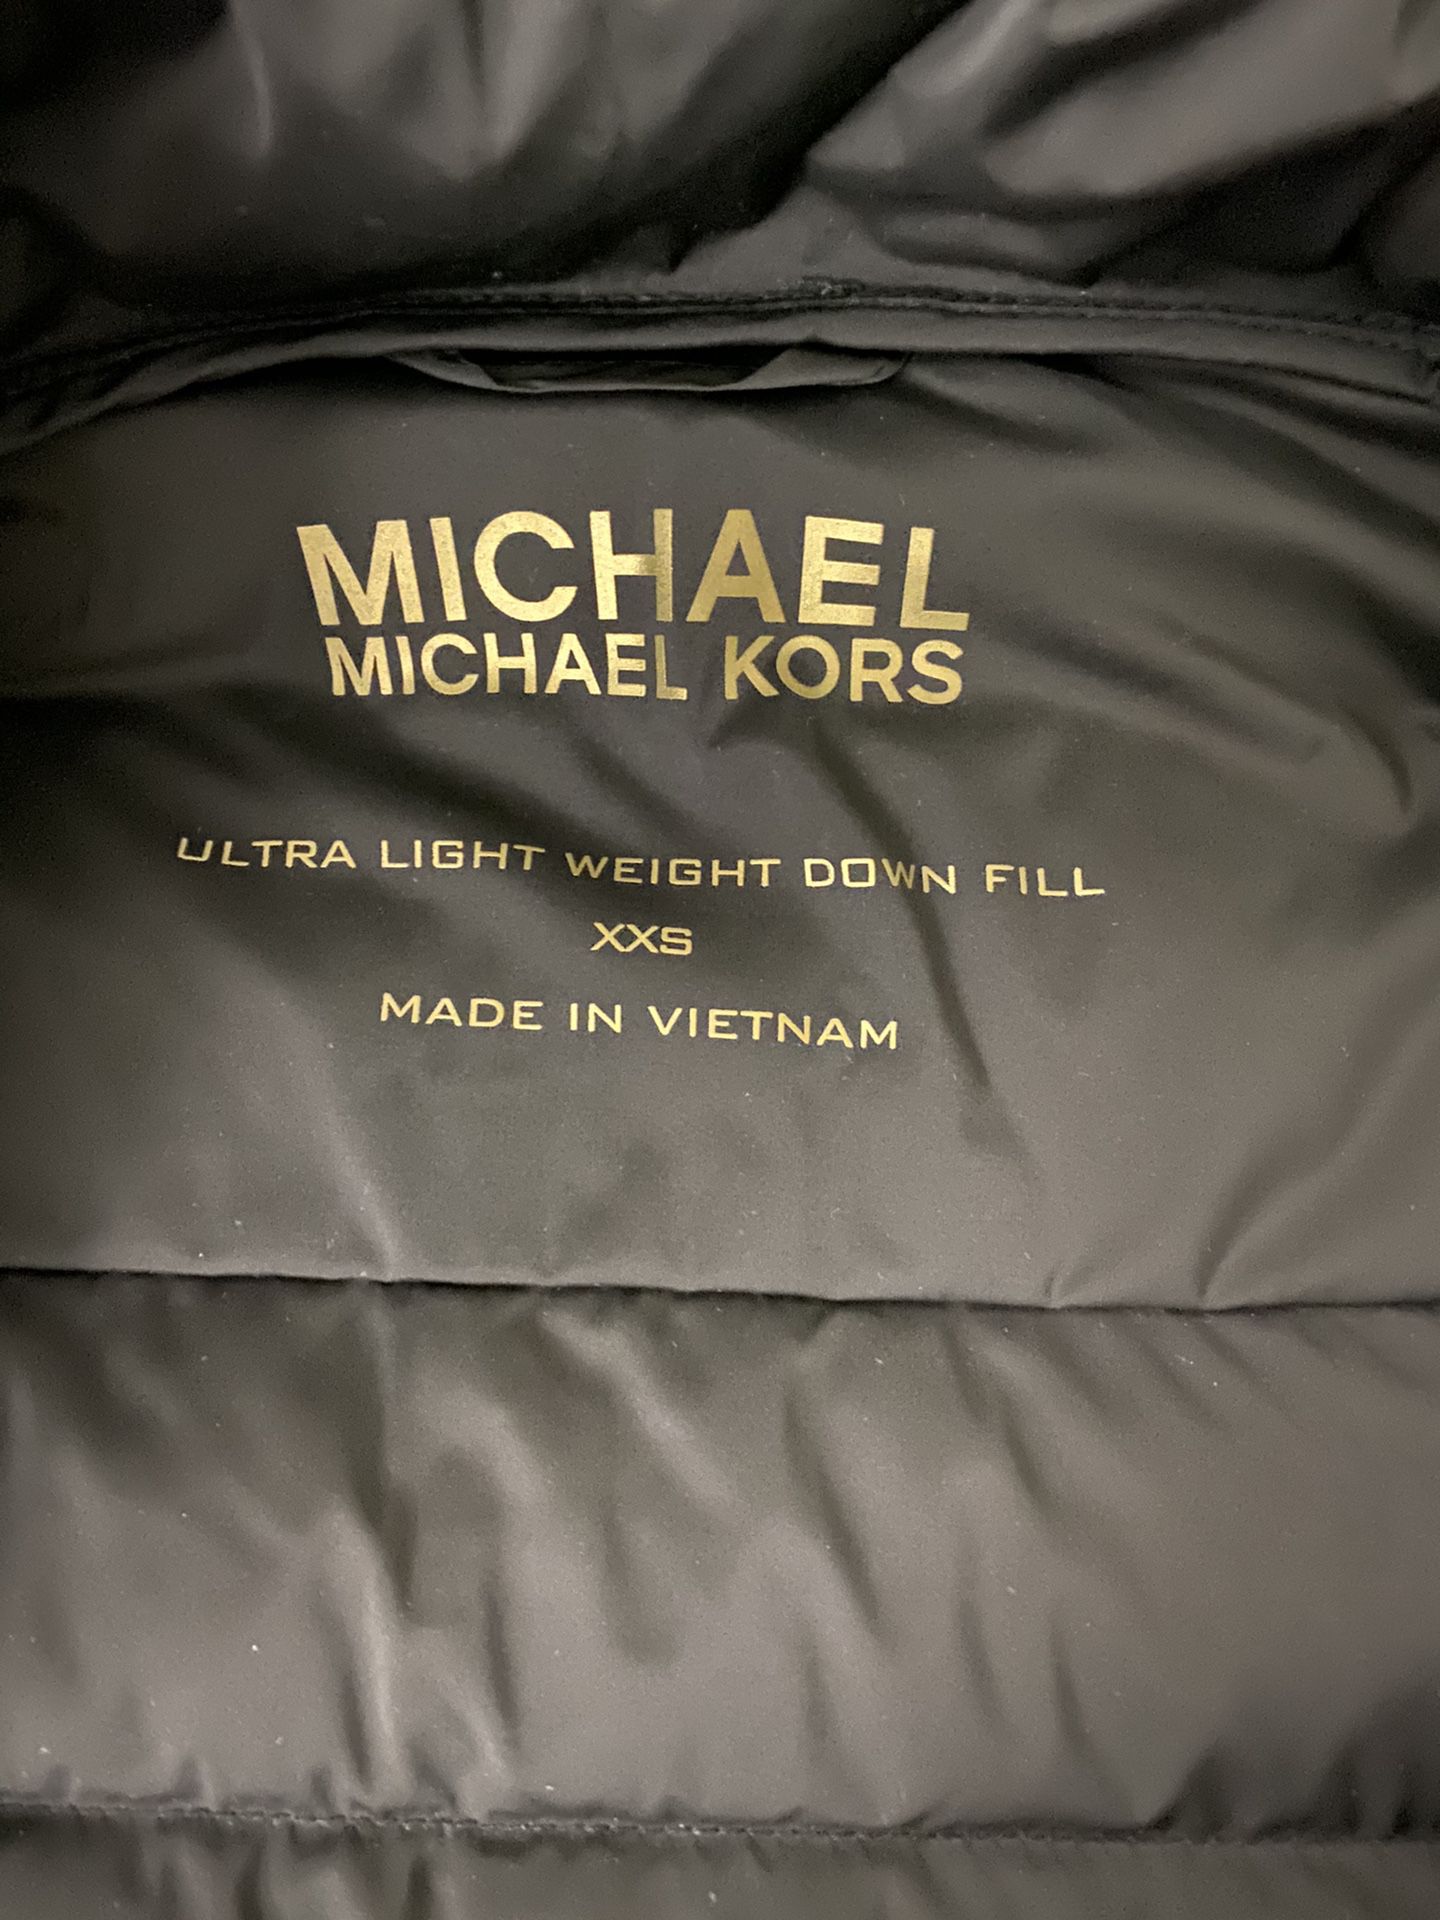 Michael Kors Ultra Light Weight Jacket for Sale in Willowbrook, IL - OfferUp